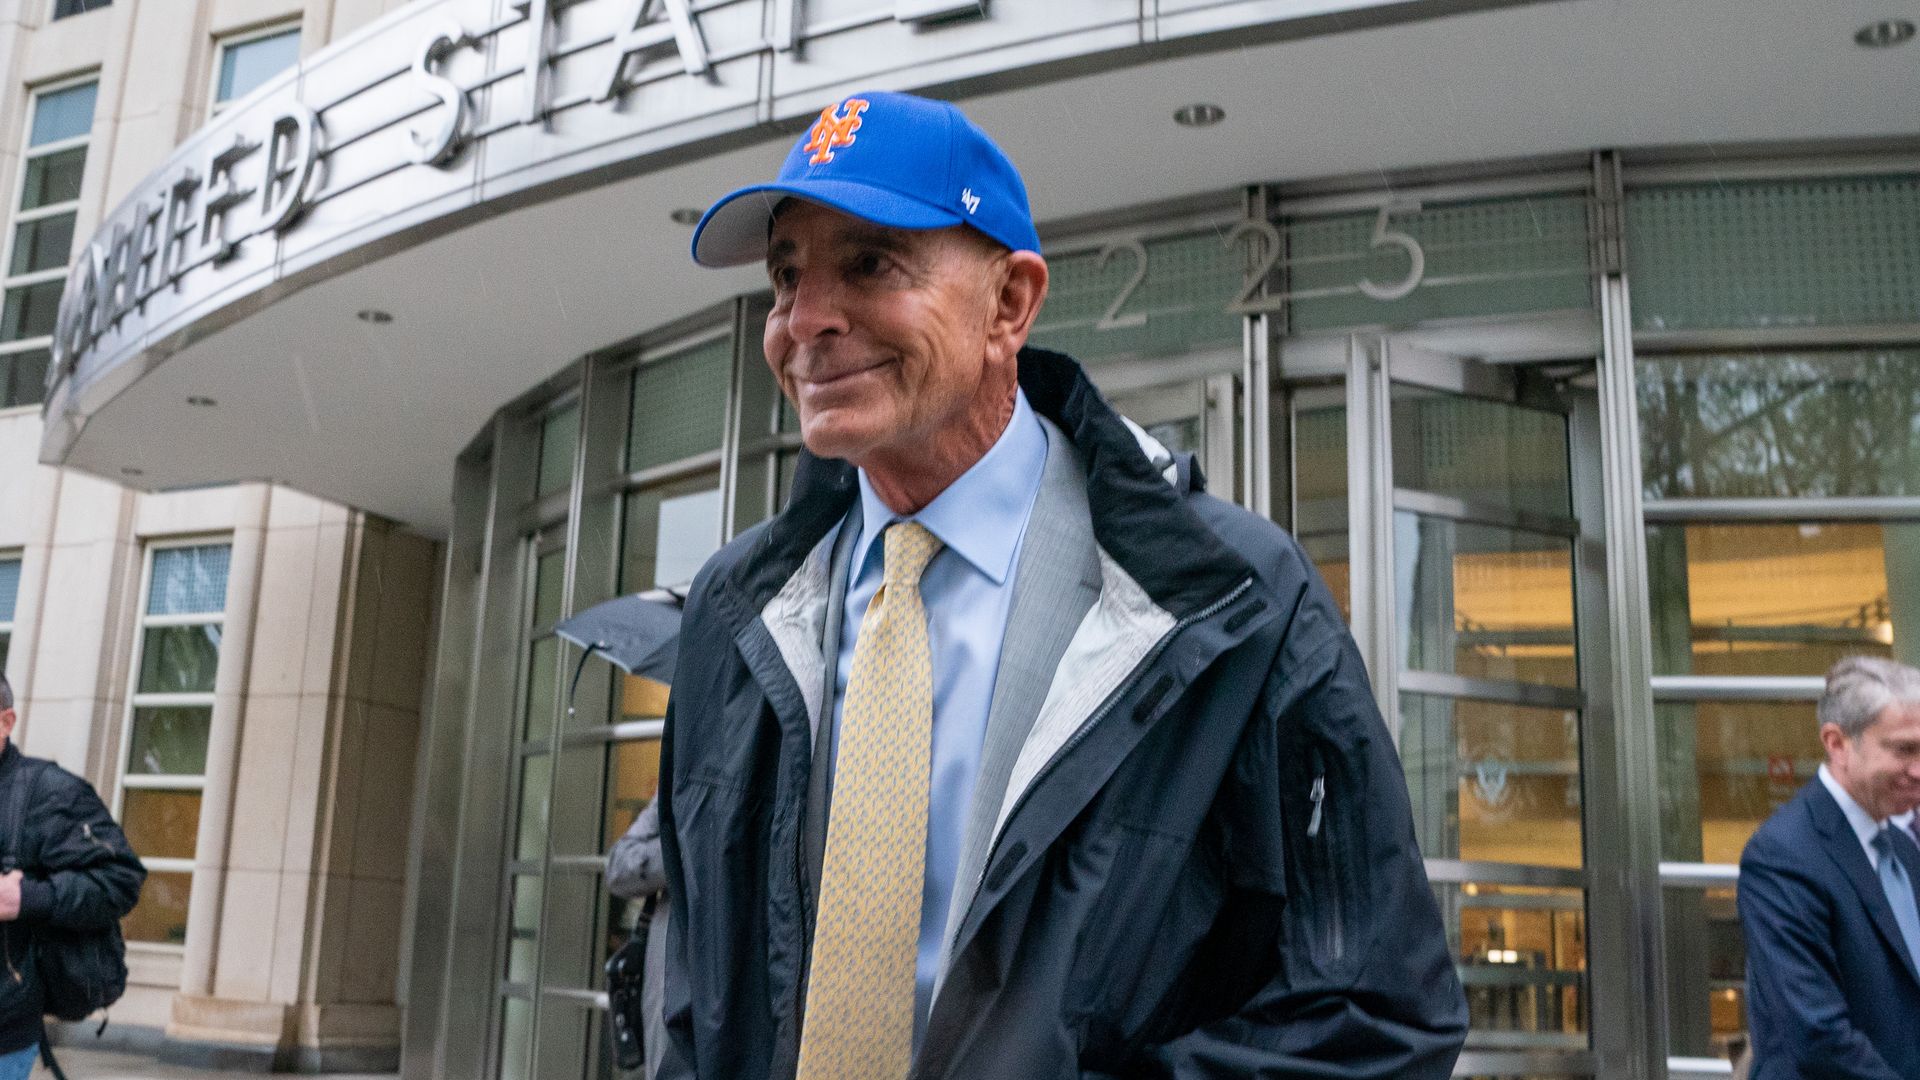 Tom Barrack Jr., founder of Colony Capital Inc., departs from criminal court docket in Recent York, US.